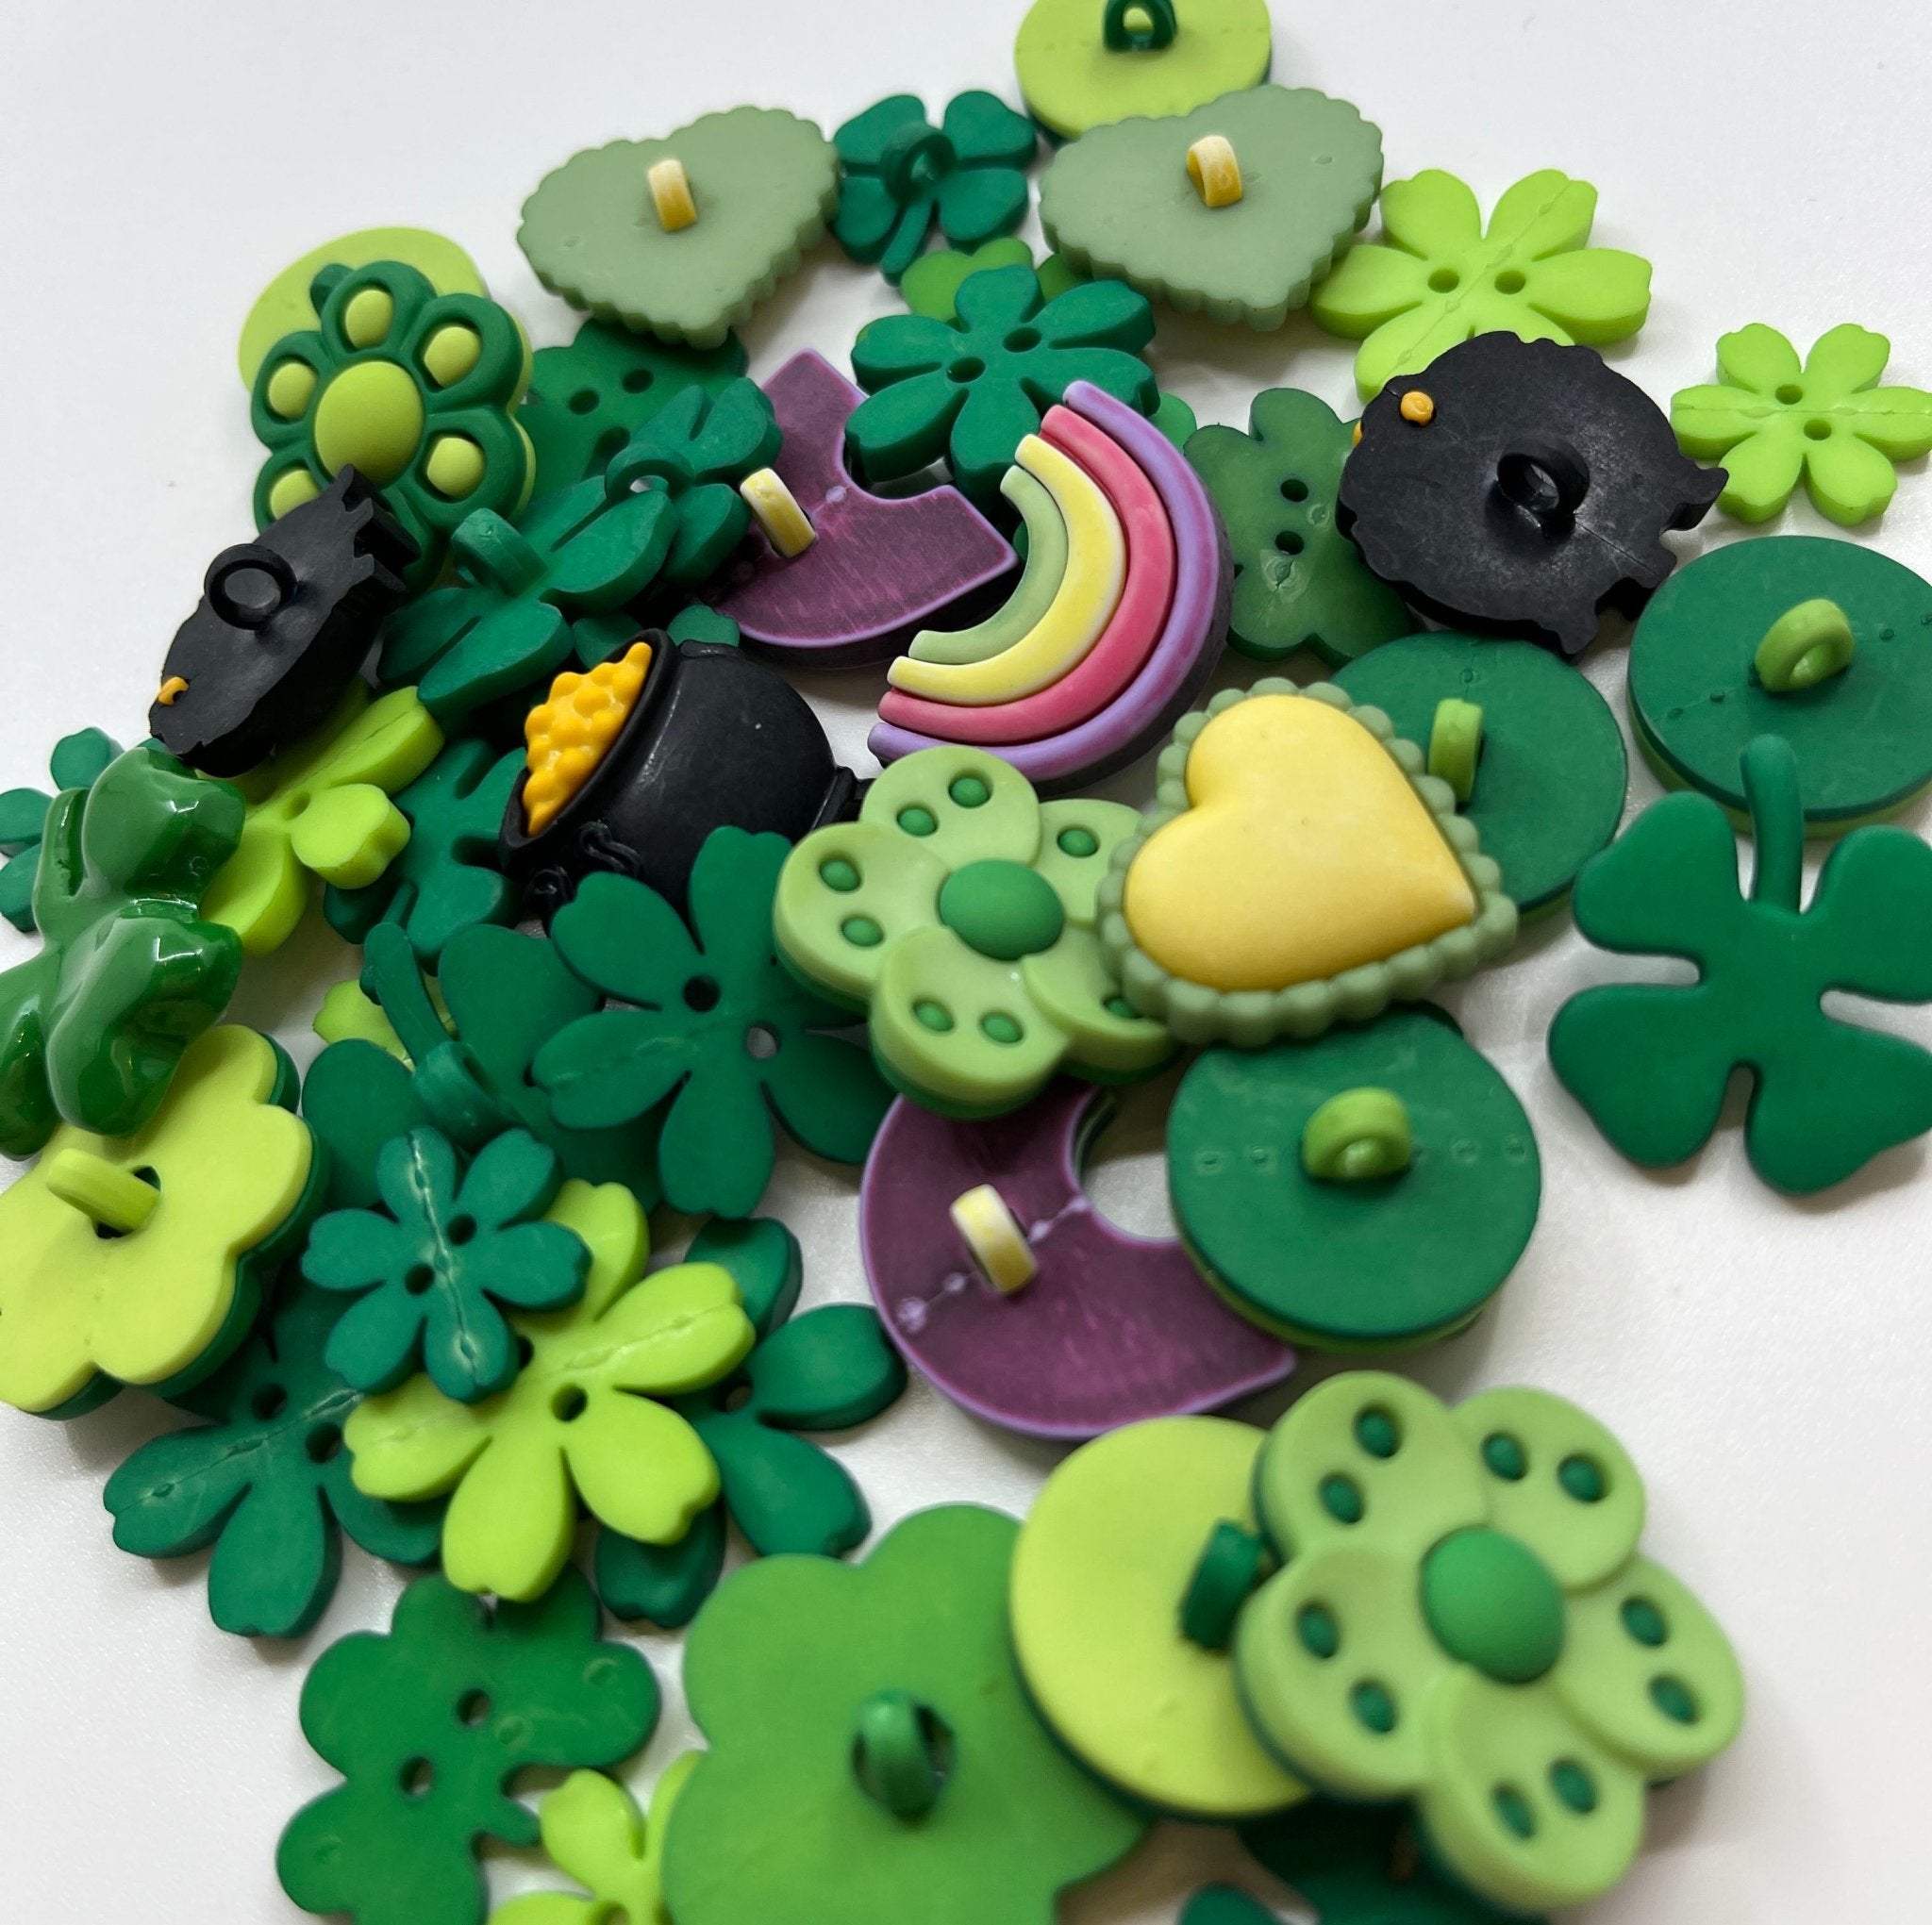 St. Patrick's Day Novelty Button Assortment - Buttons Galore and More